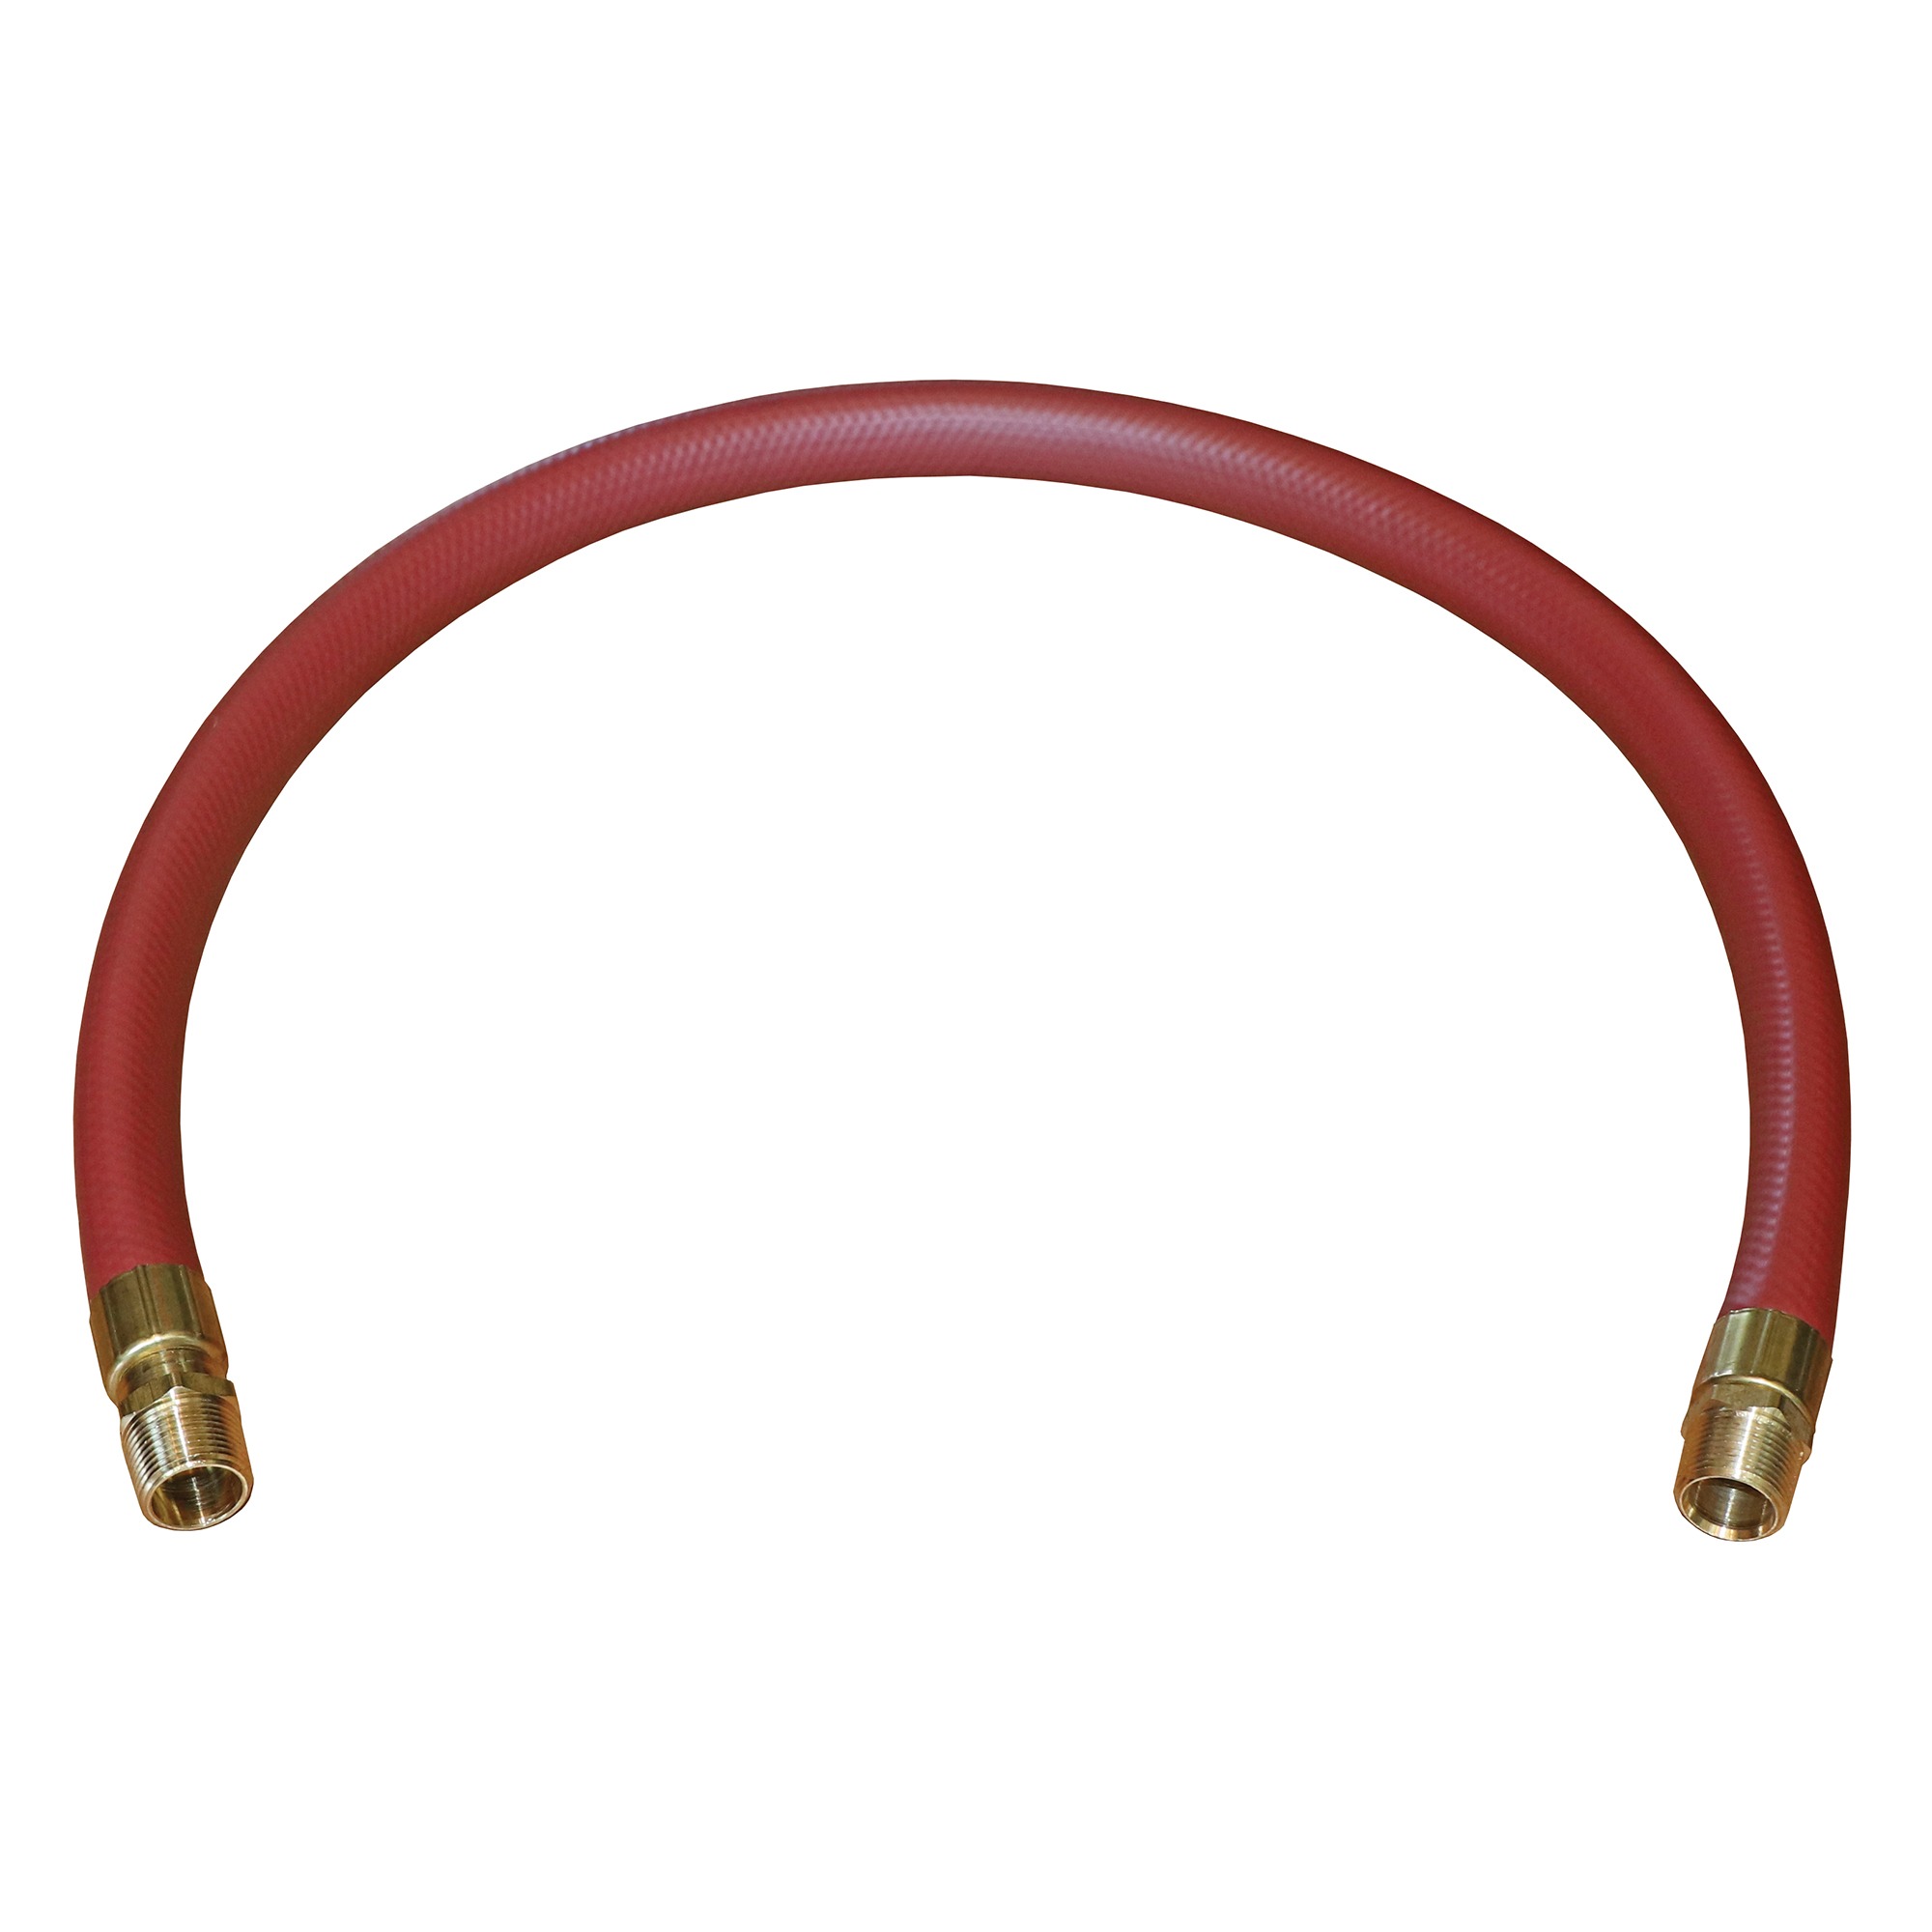 Reelcraft S601034-3 - 3/4 in. x 3 ft. Air/Water Inlet Hose